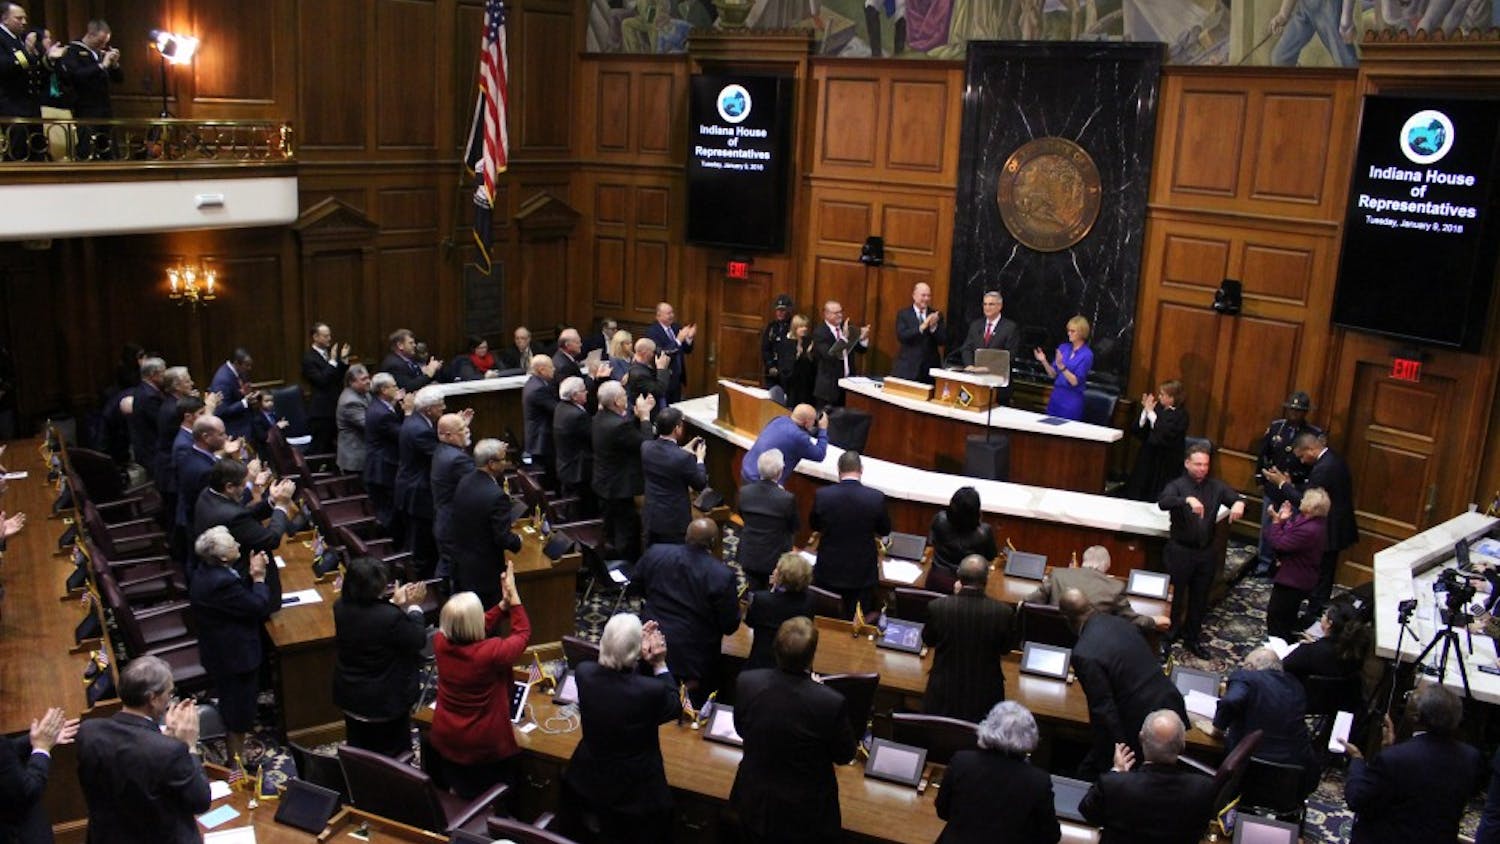 The members of the Indiana General Assembly stand up and cheer as Gov. Eric Holcomb finishes his State of the State speech. Holcomb's thirty-minute speech introduced his goals for the state this year.